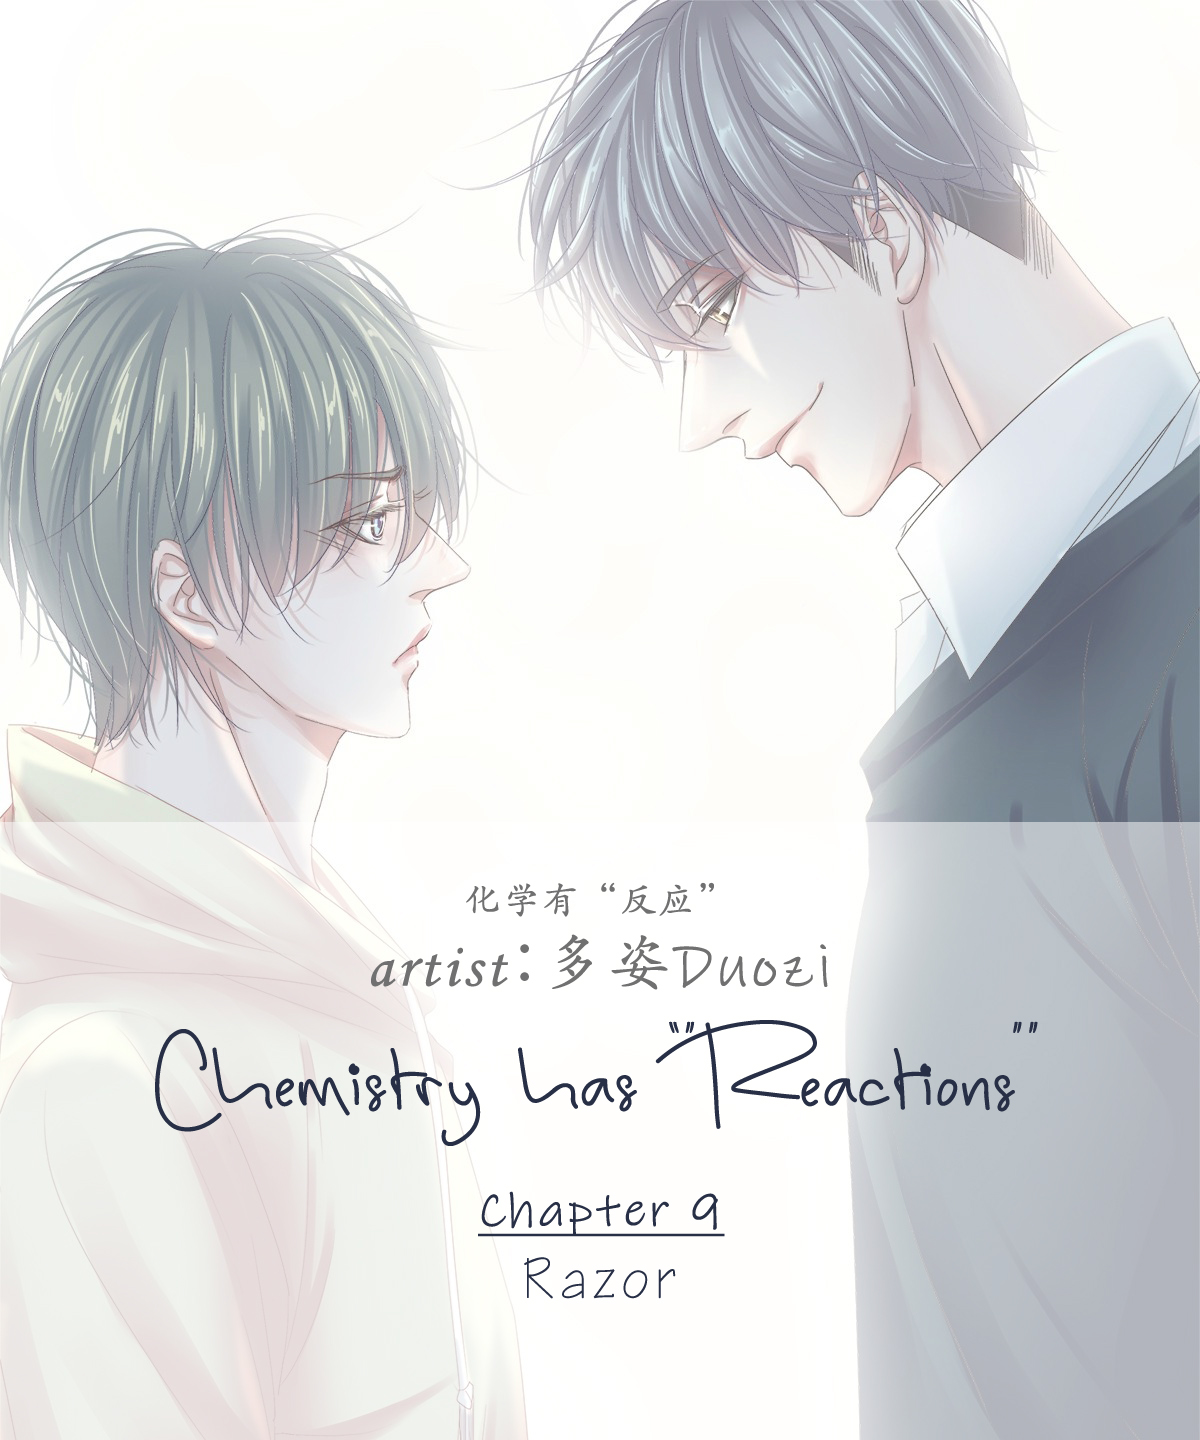 Chemistry has "Reactions" Vol. 1 Ch. 9